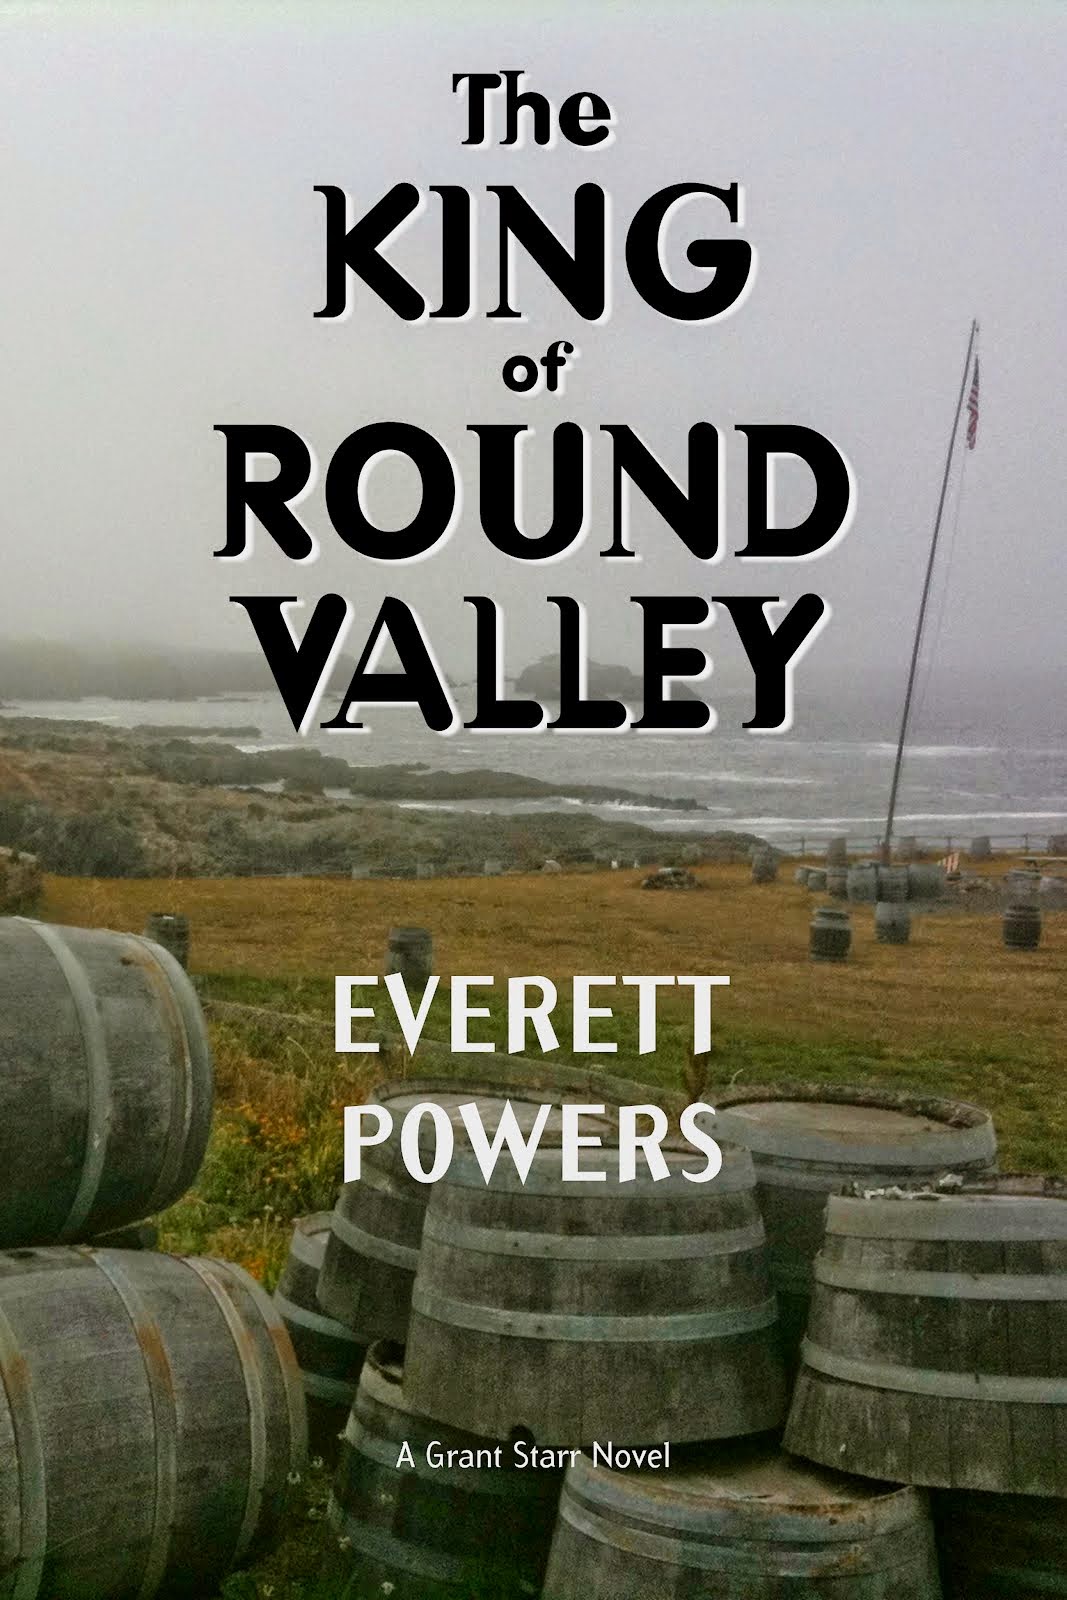 The King of Round Valley